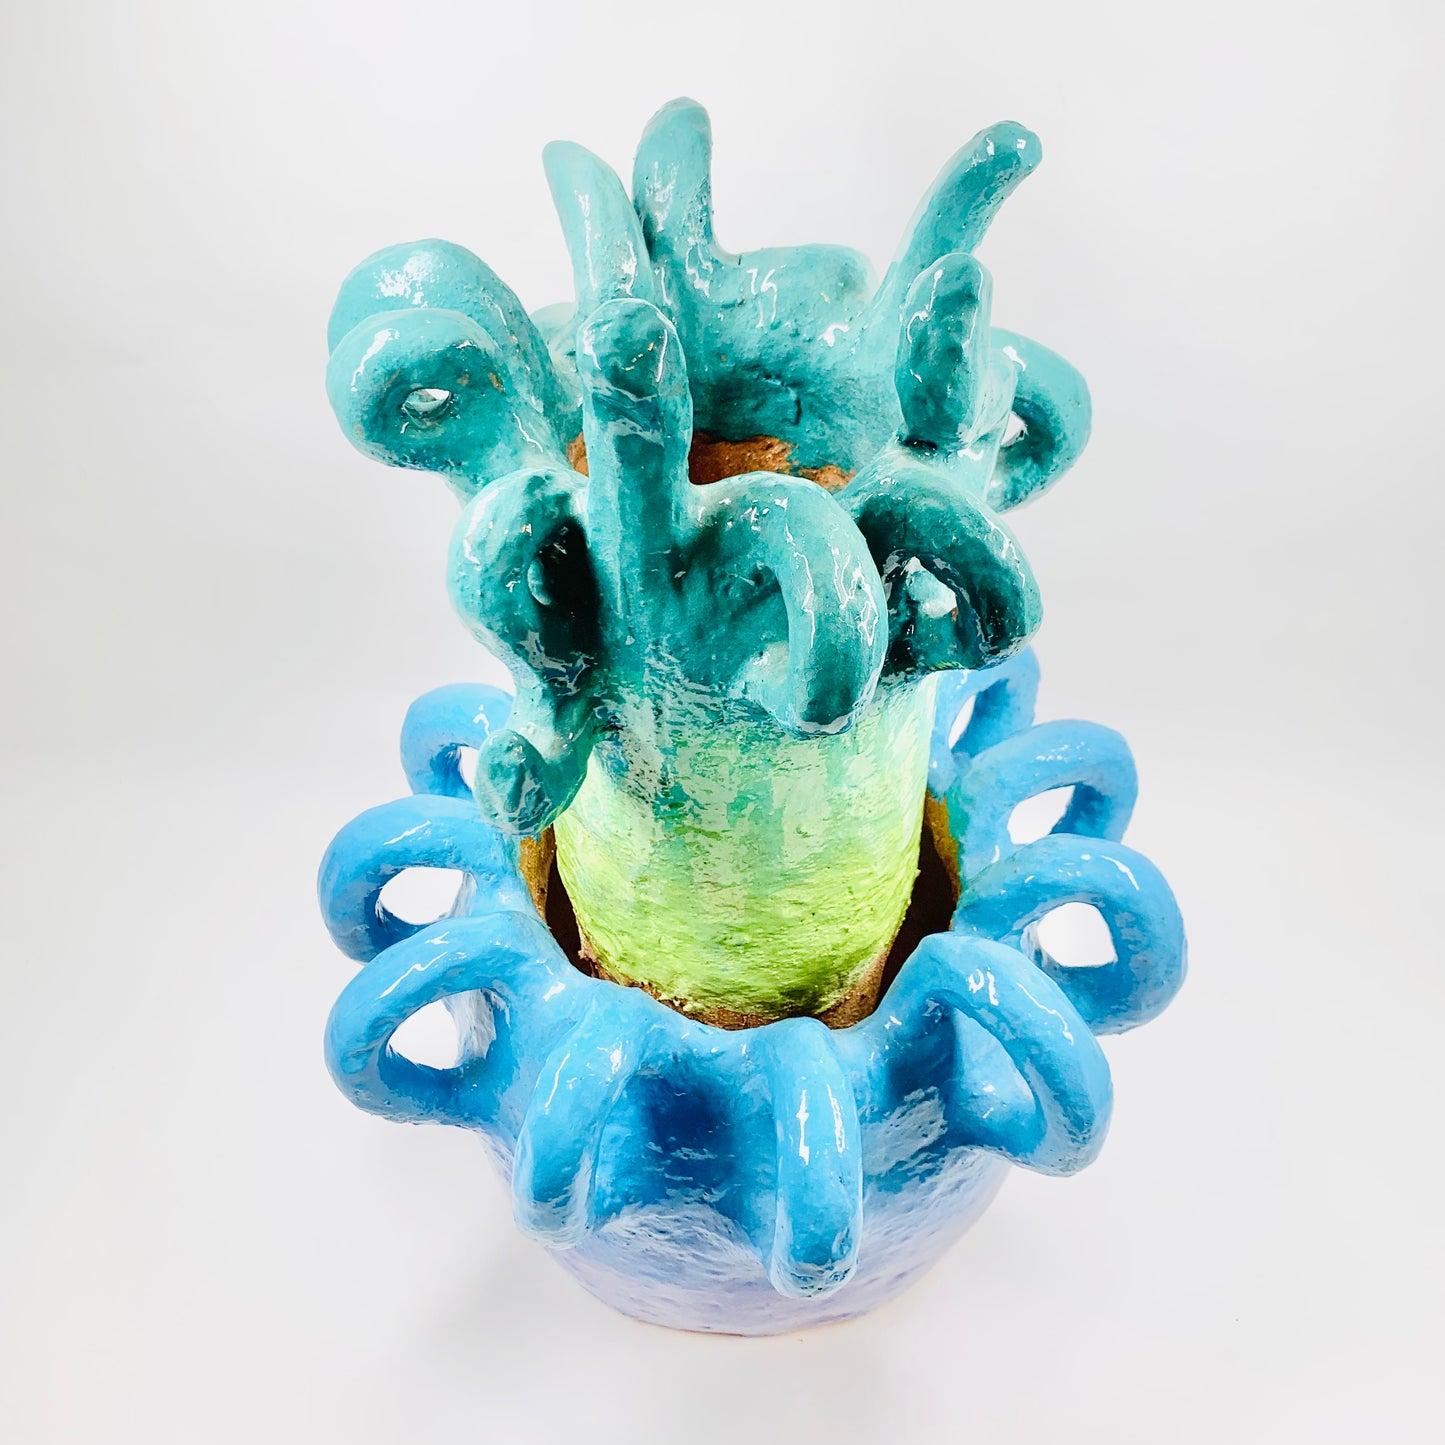 One off 1980s experimental studio abstract green blue pottery vase